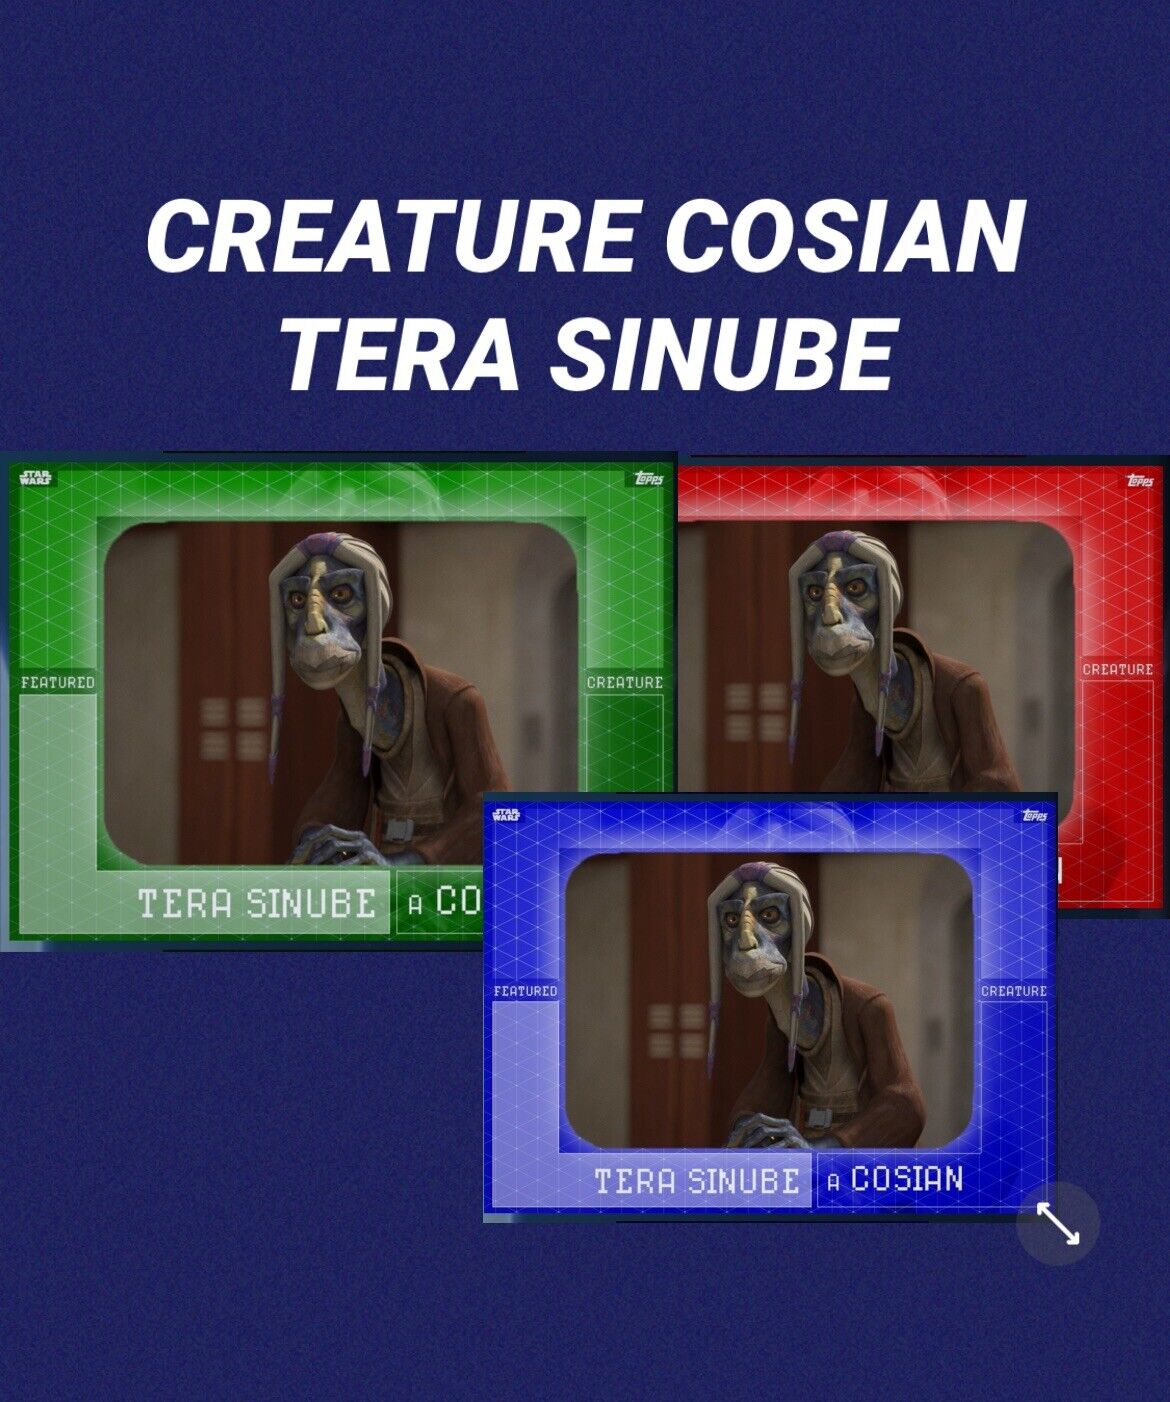 topps star wars card Trader TERA SINUBE COSIAN  CREATURE GREEN RED BLUE